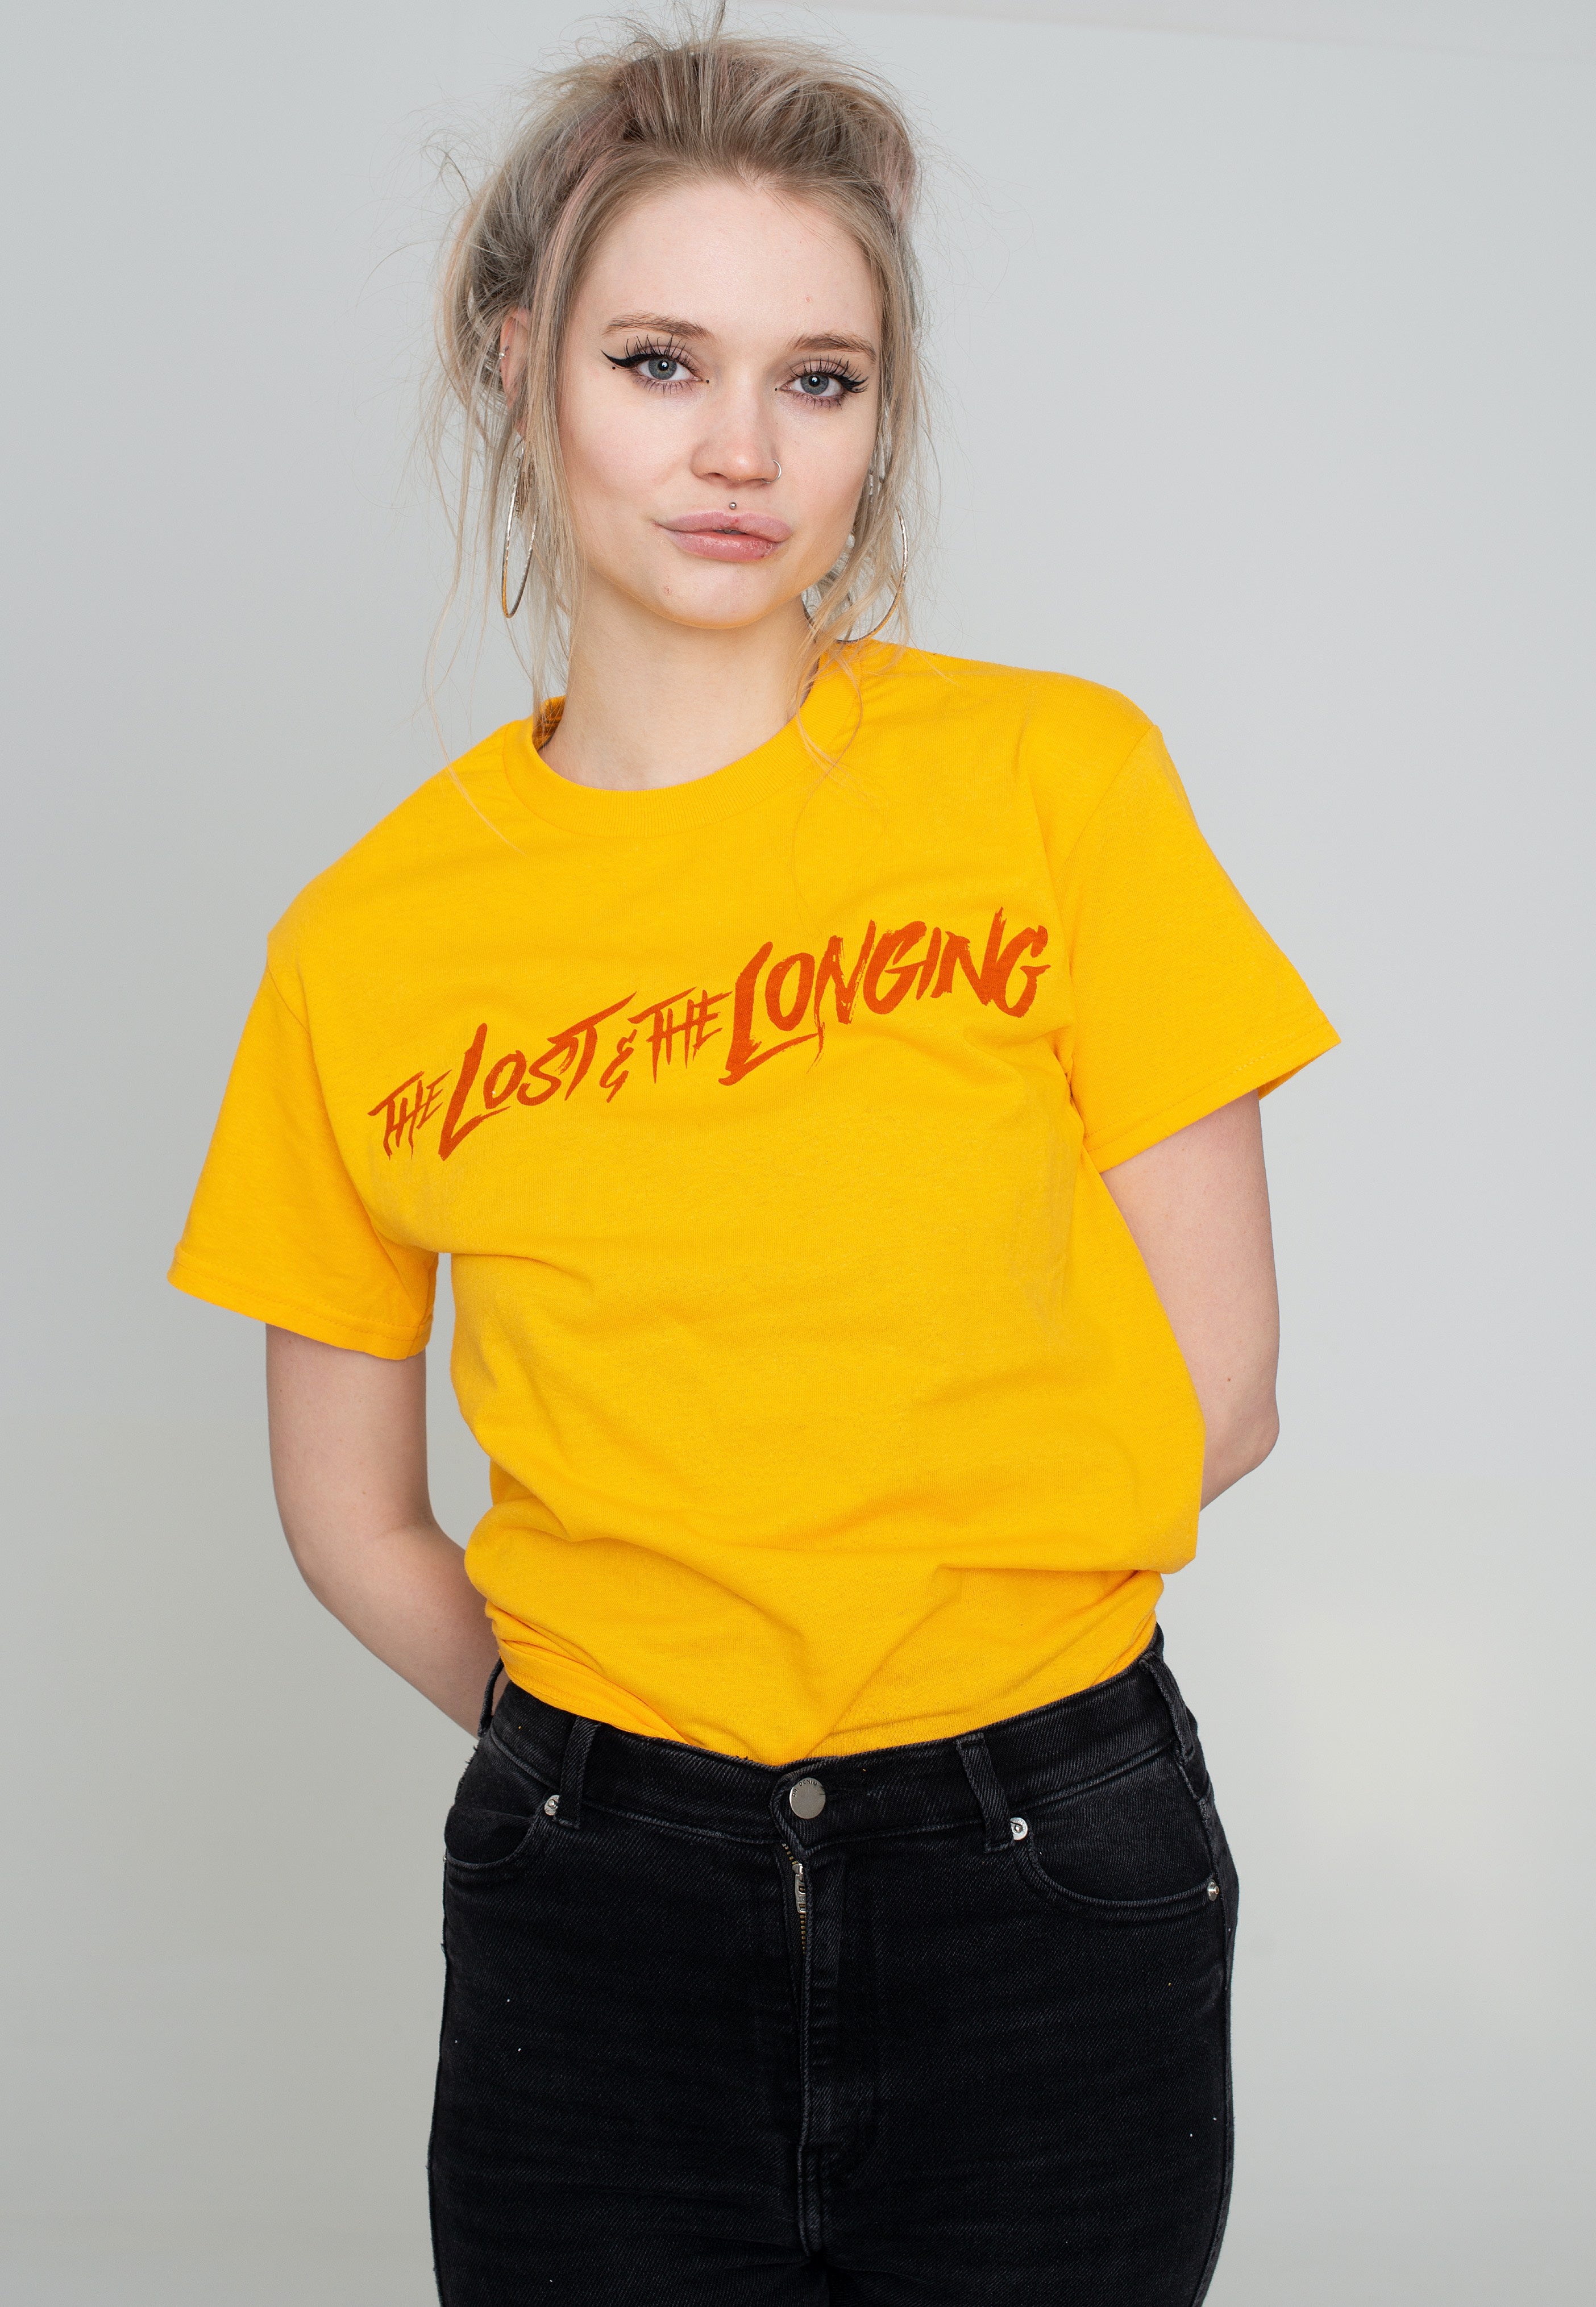 Alpha Wolf & Holding Absence - The Lost & The Longing Gold - T-Shirt | Women-Image